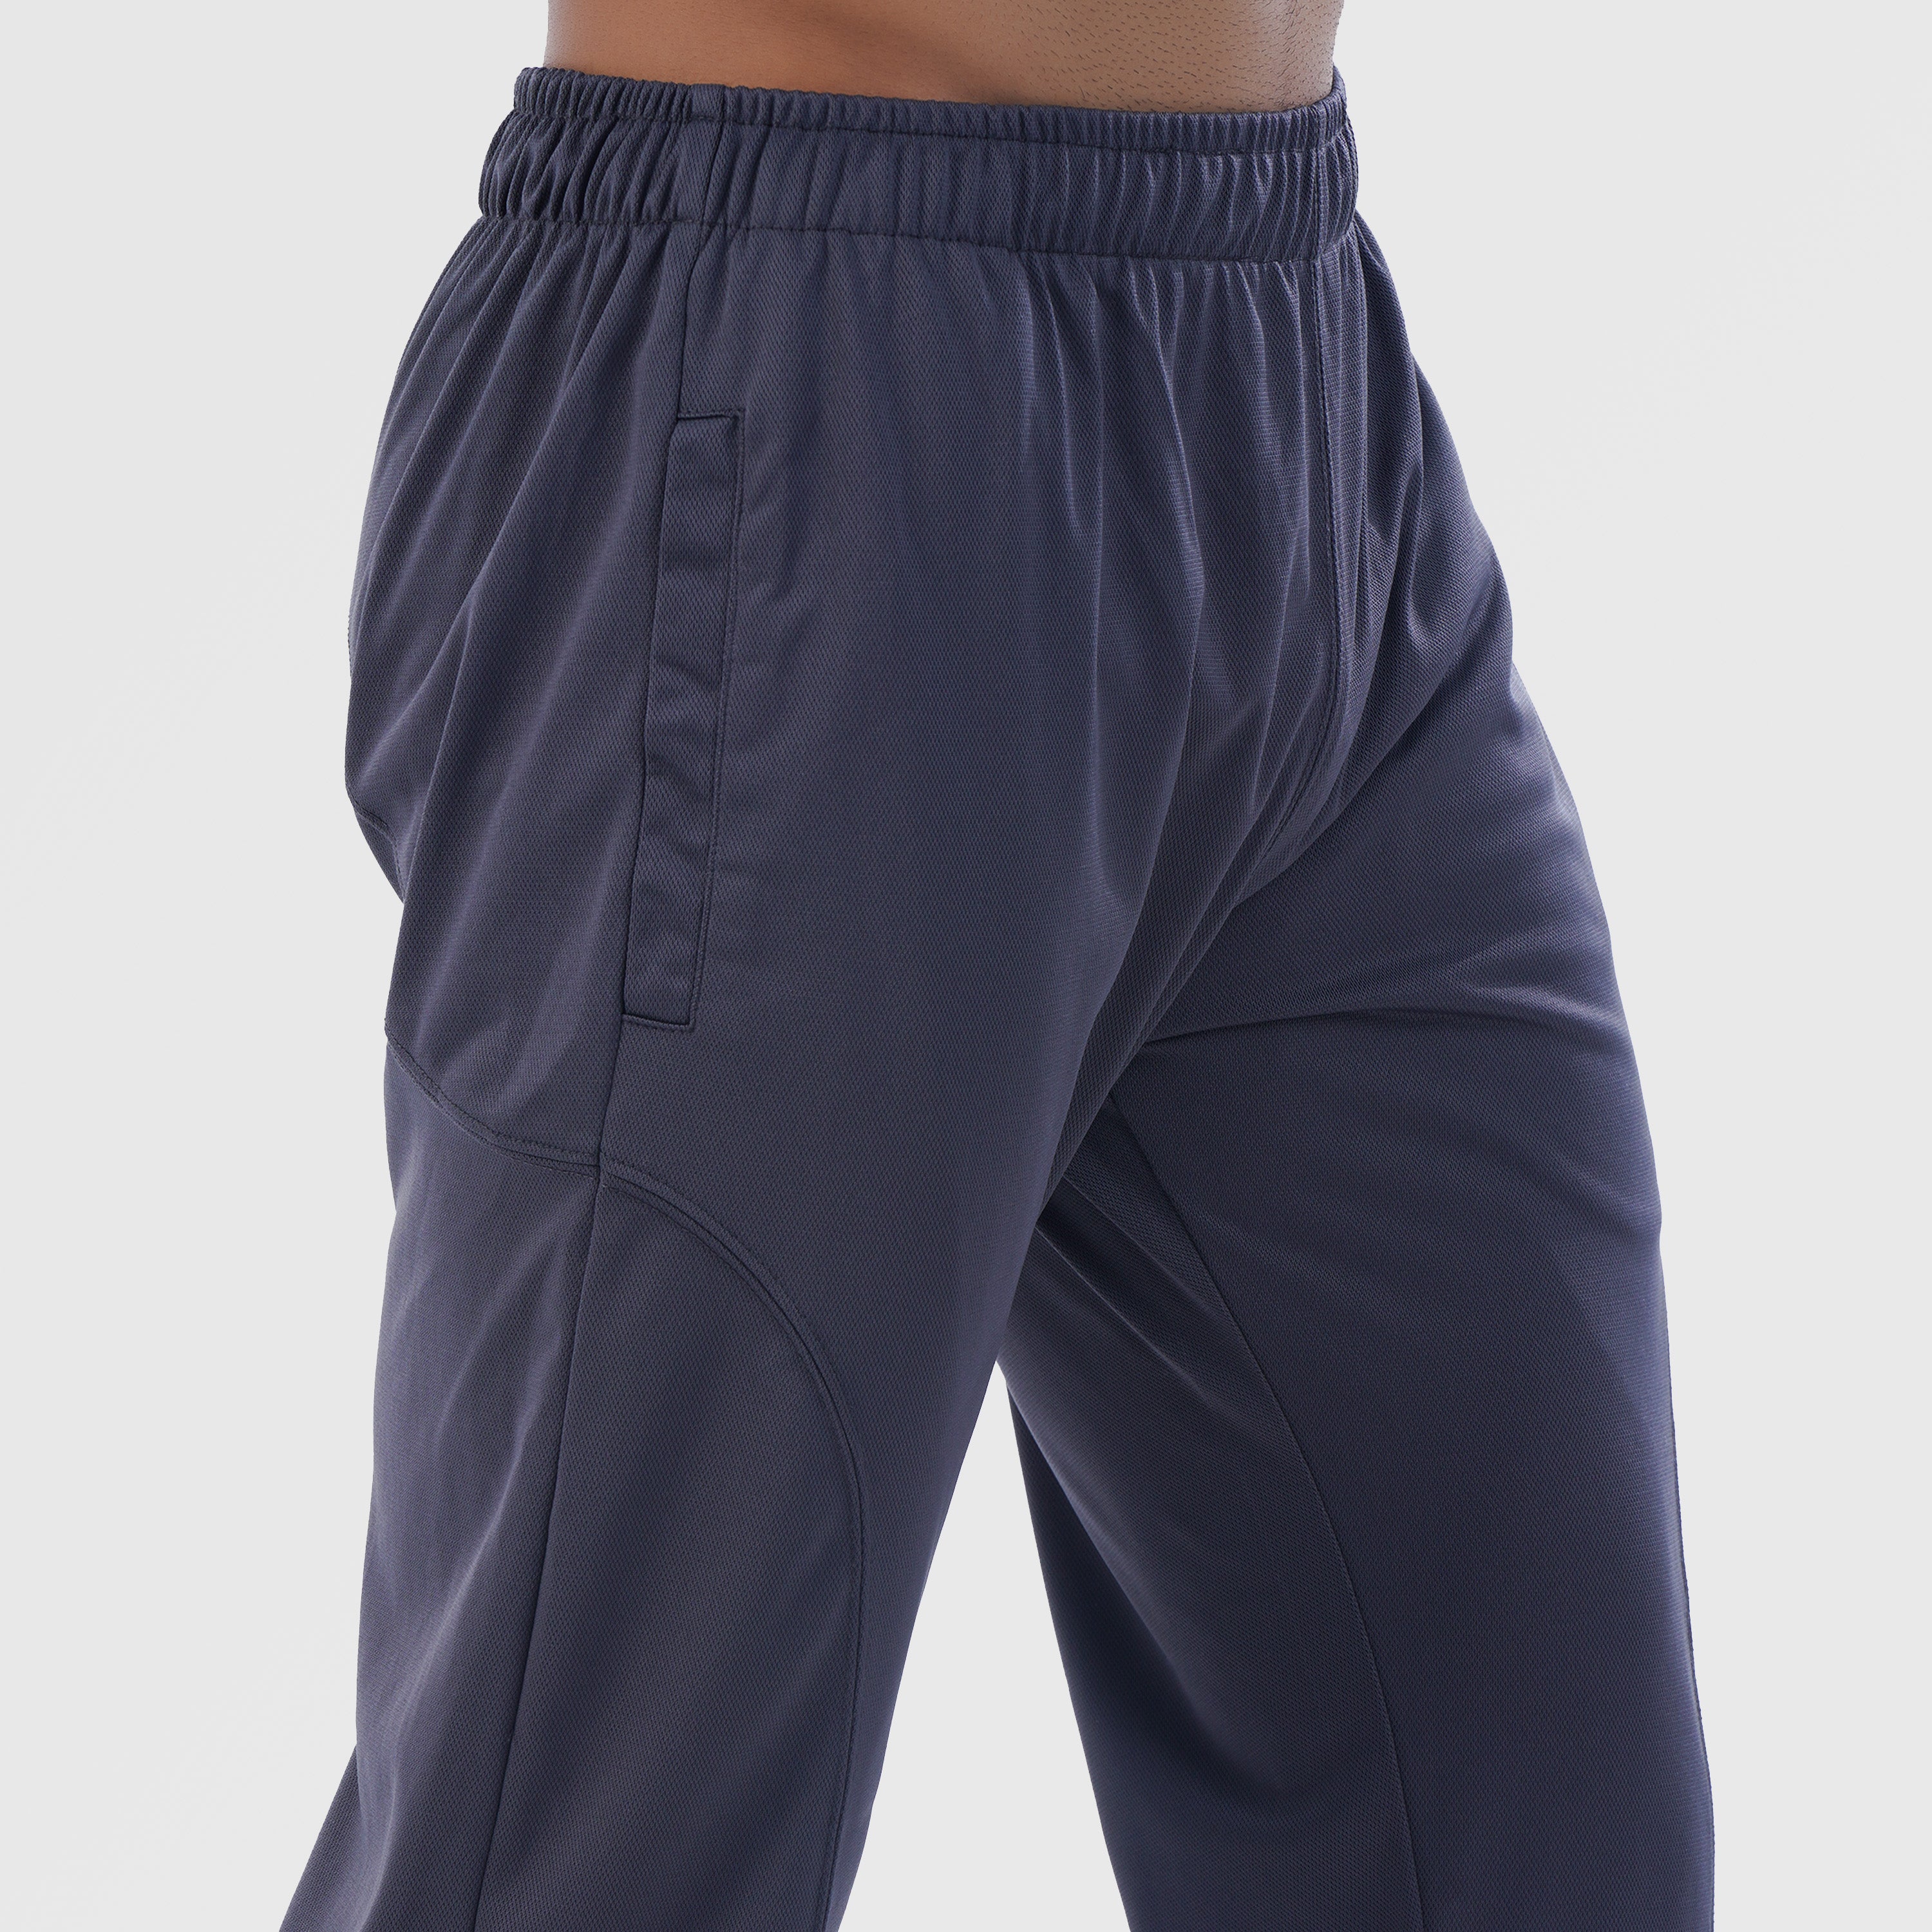 Voyager Trousers (Grey)